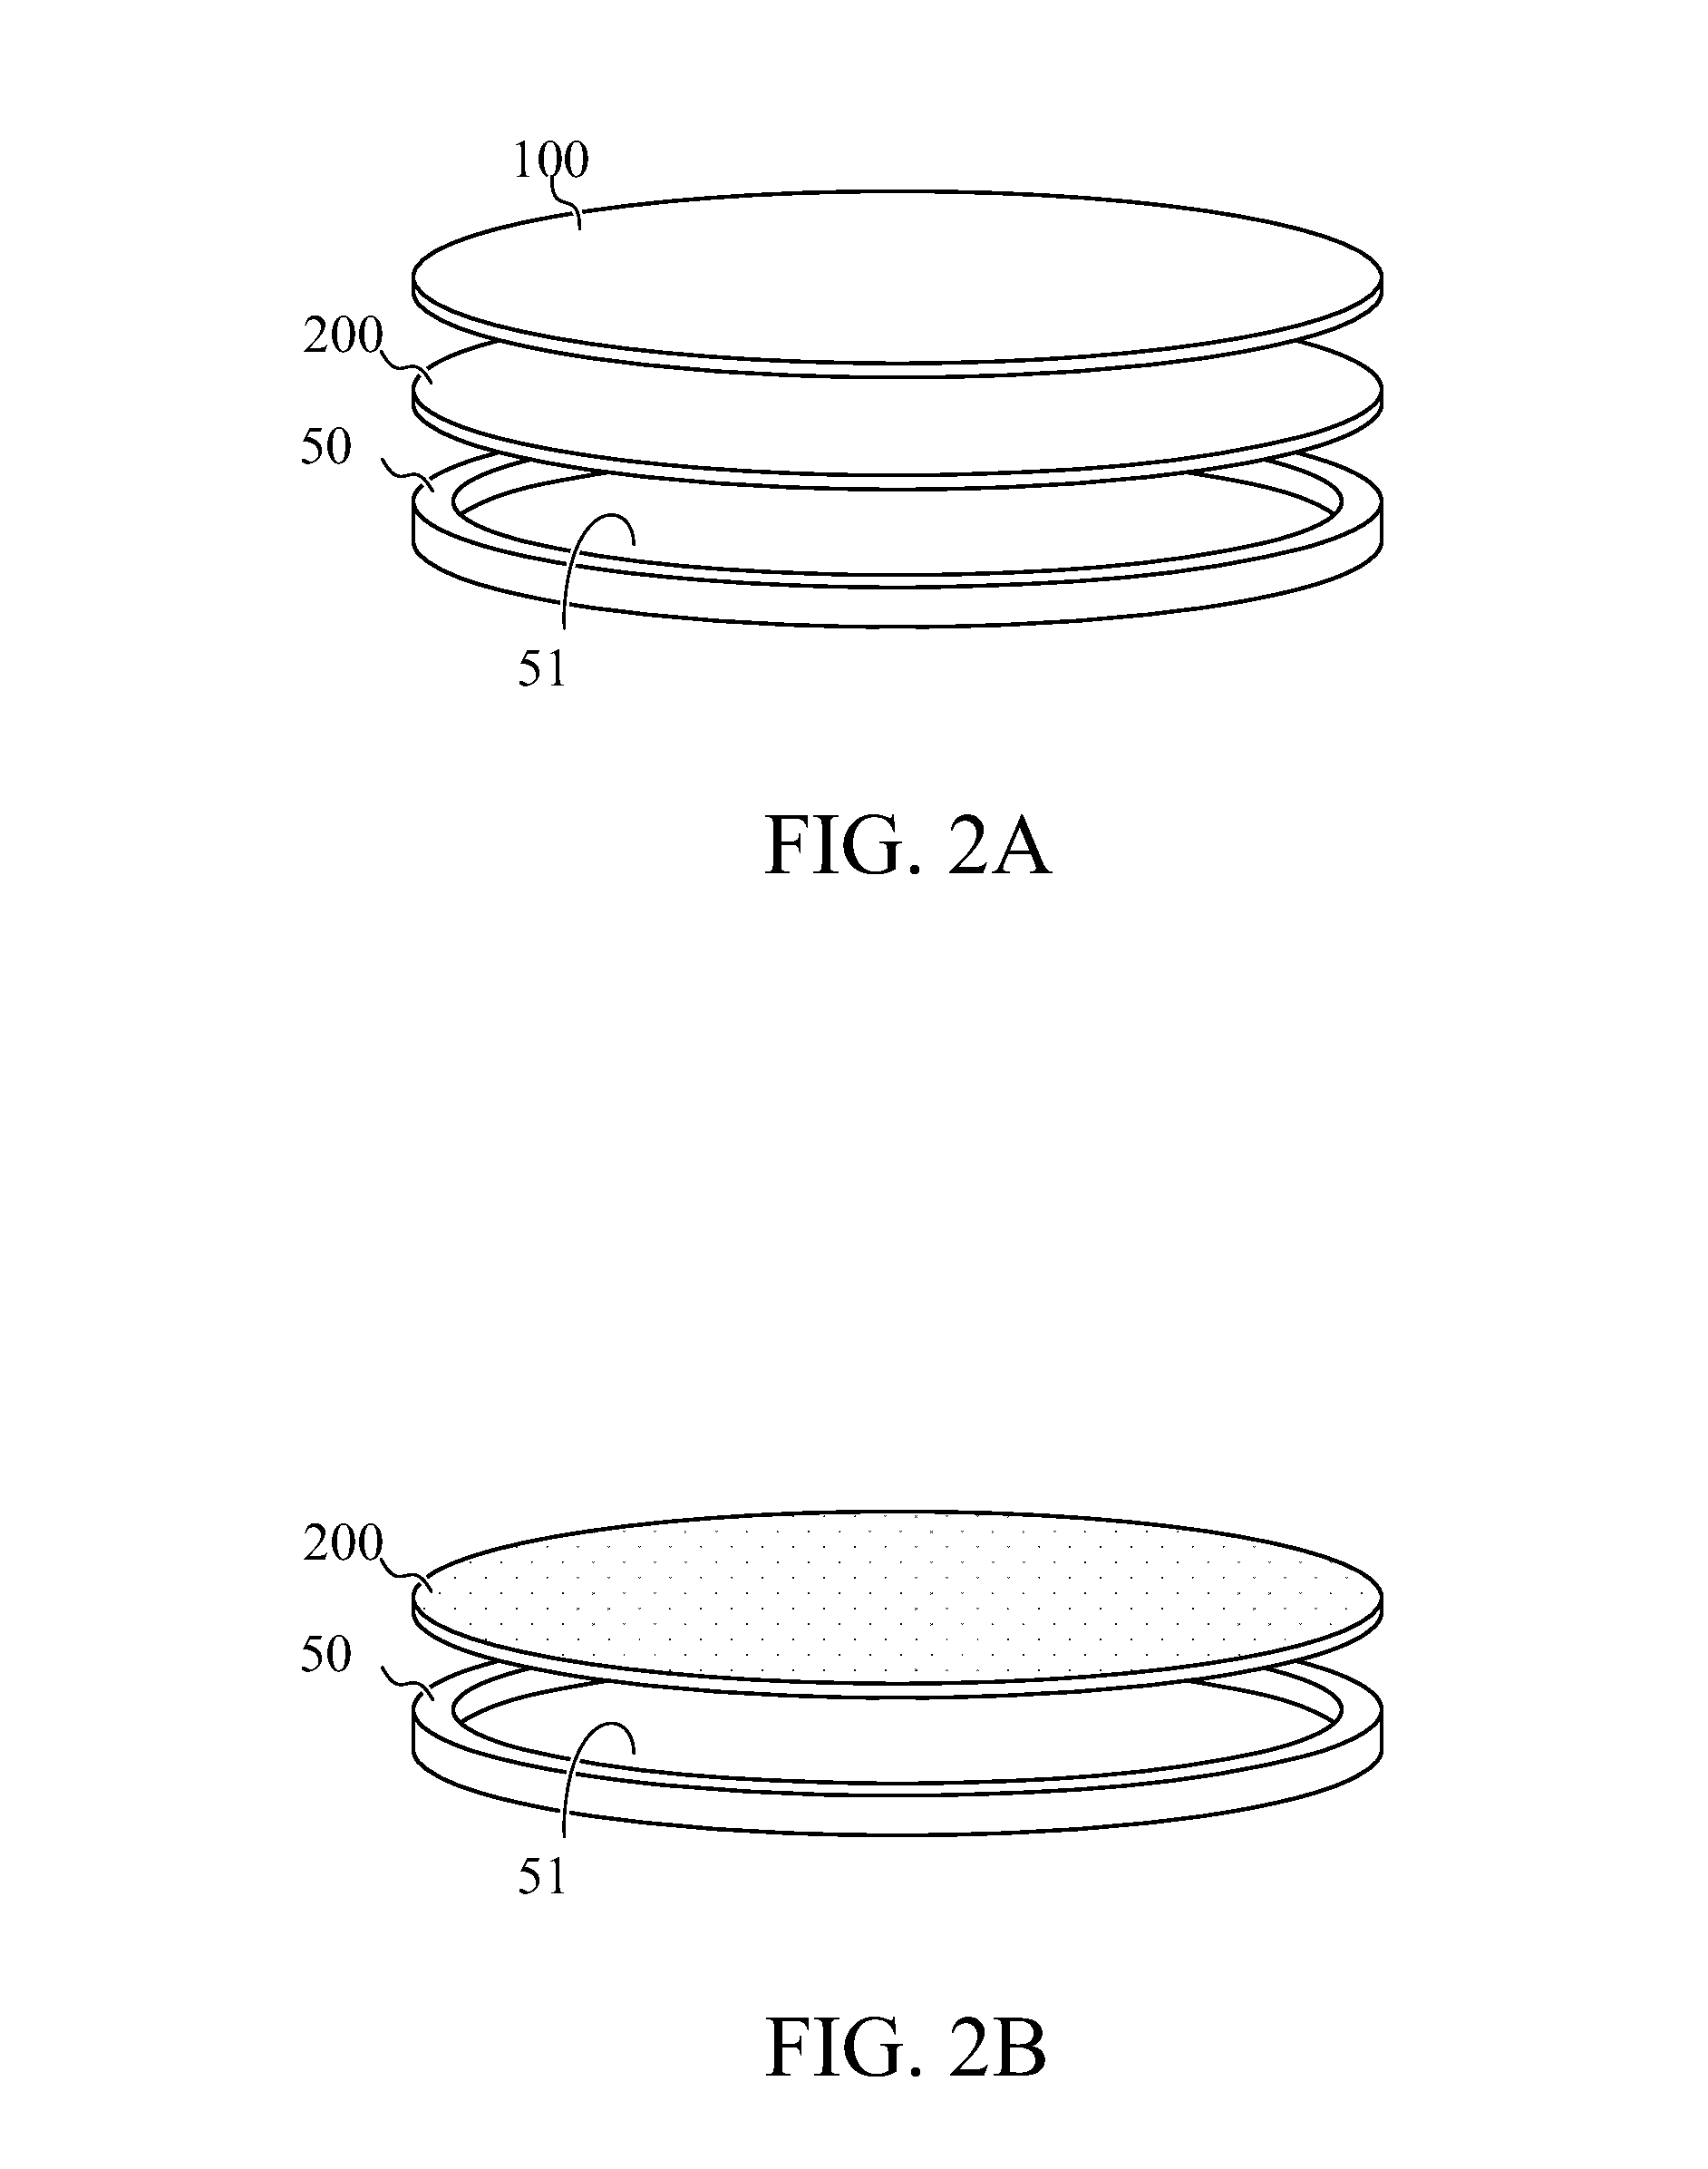 Sacrificial Cover Layers for Laser Drilling Substrates and Methods Thereof